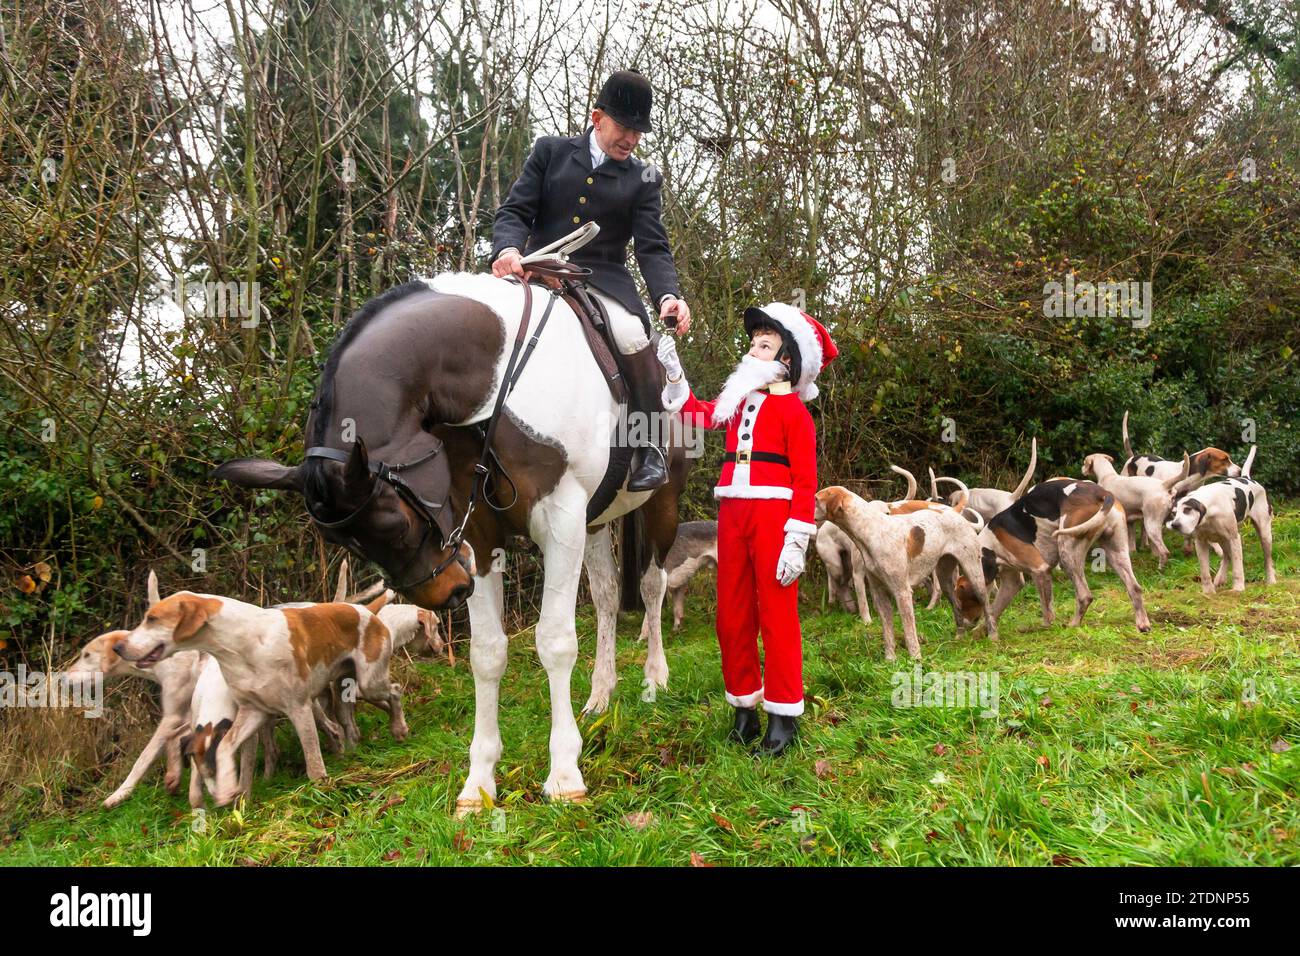 Upper Arley, Kidderminster, Worcestershire, UK. 19th Dec, 2023. 10-year-old Henley Mills dressed as Santa Claus hands the traditional glass of port to the Master of the Foxhounds from the Albrighton and Woodland hunt as they have a lawn meet and trail ride from a farm in Upper Arley, near Kidderminster in Worcestershire. Credit: Peter Lopeman/Alamy Live News Stock Photo